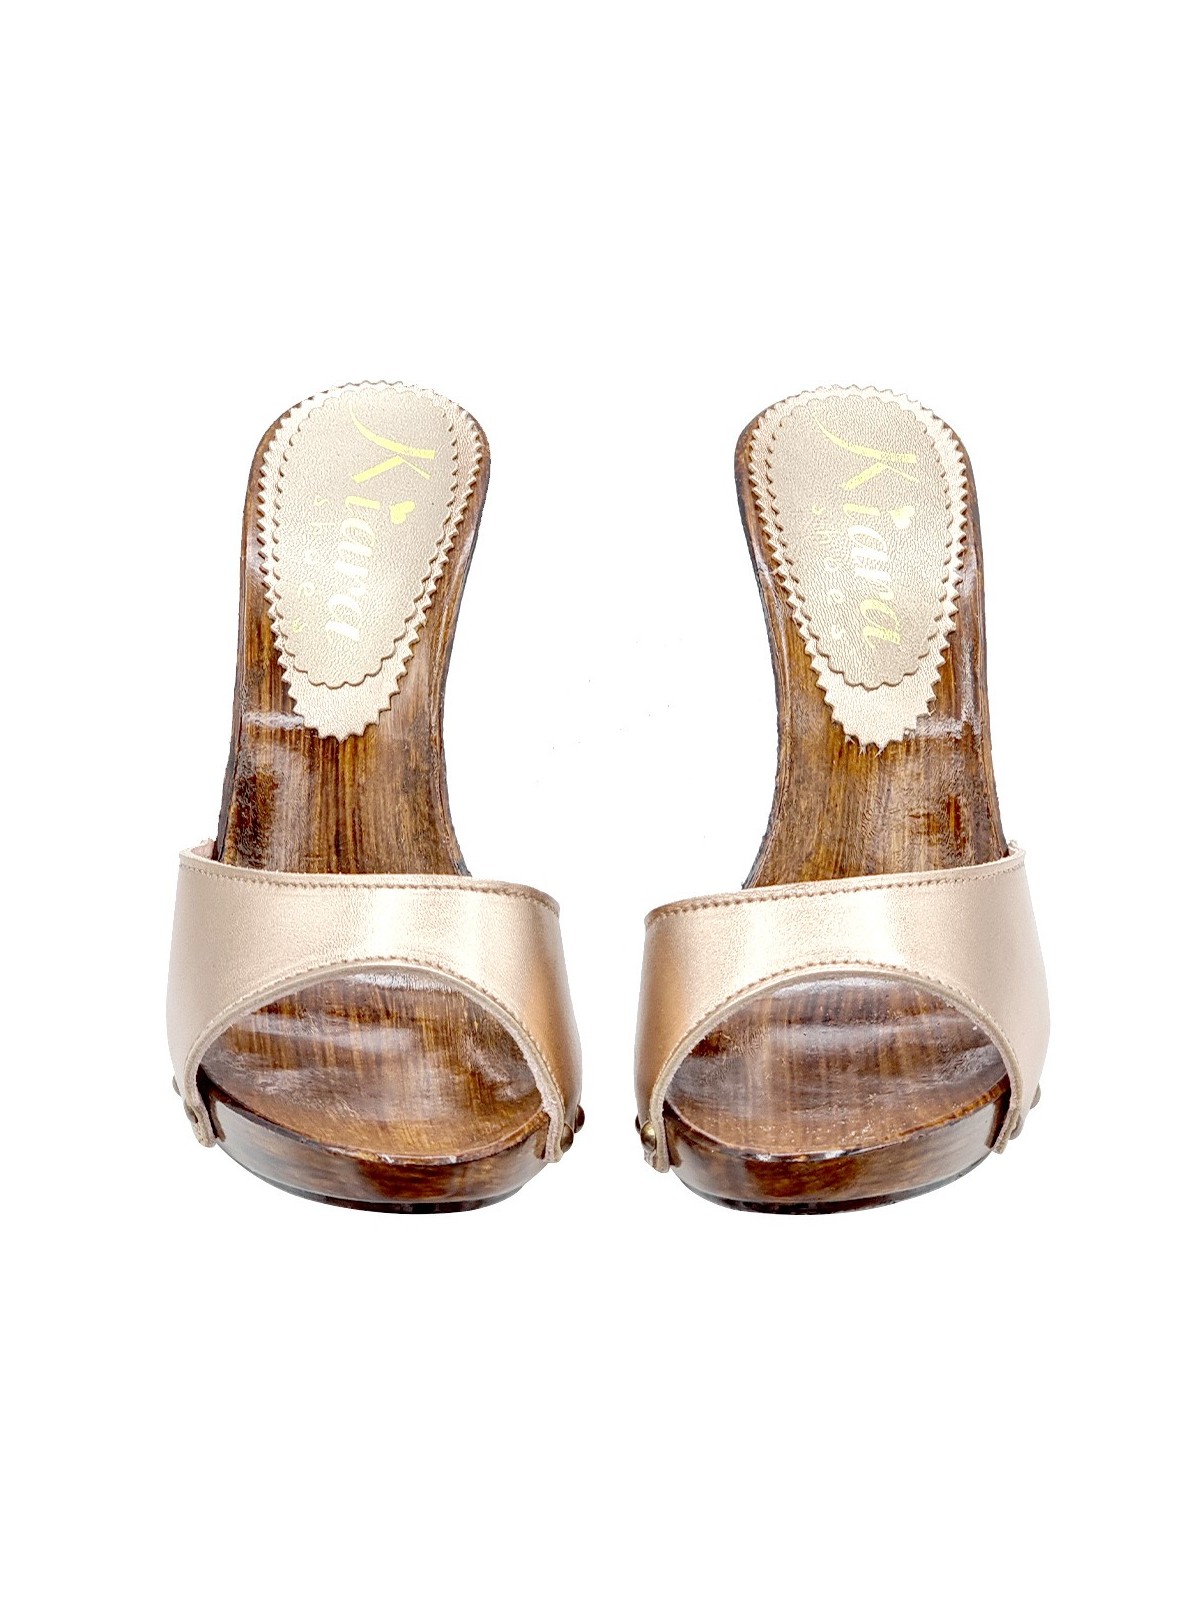 CLOGS WITH BRONZE LEATHER BAND AND HEEL 12